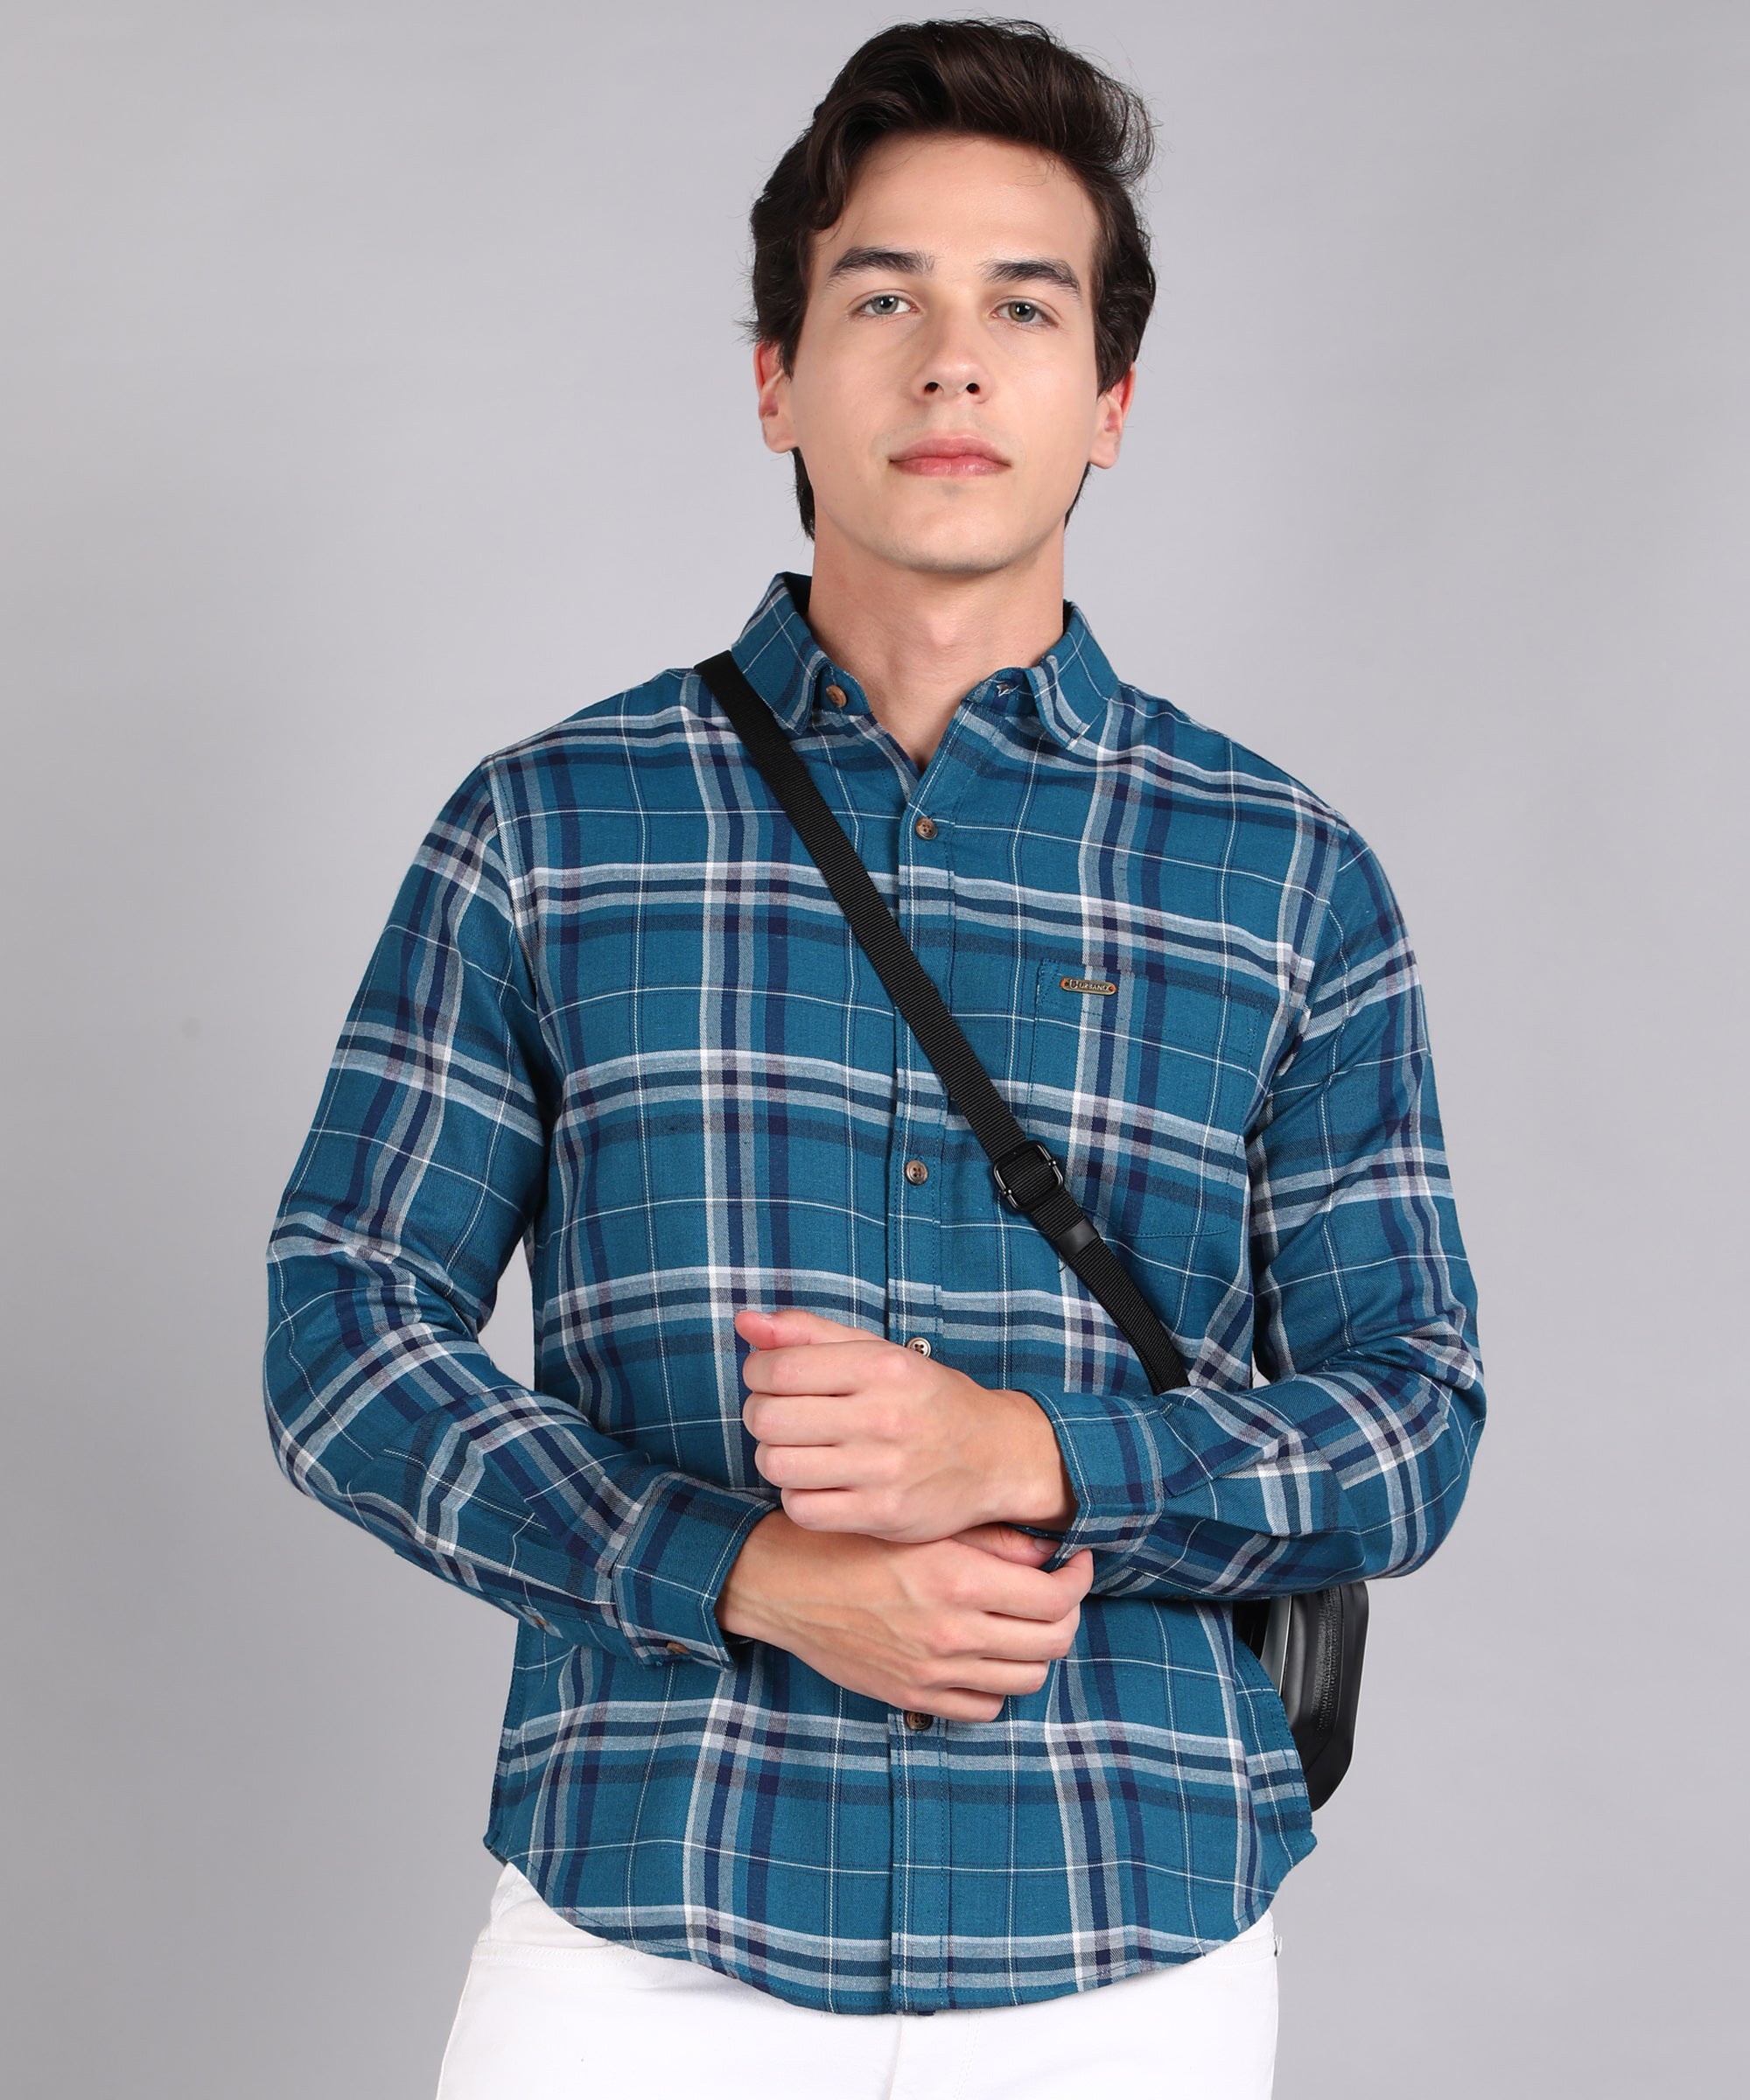 Men's Blue Cotton Full Sleeve Slim Fit Casual Checkered Shirt